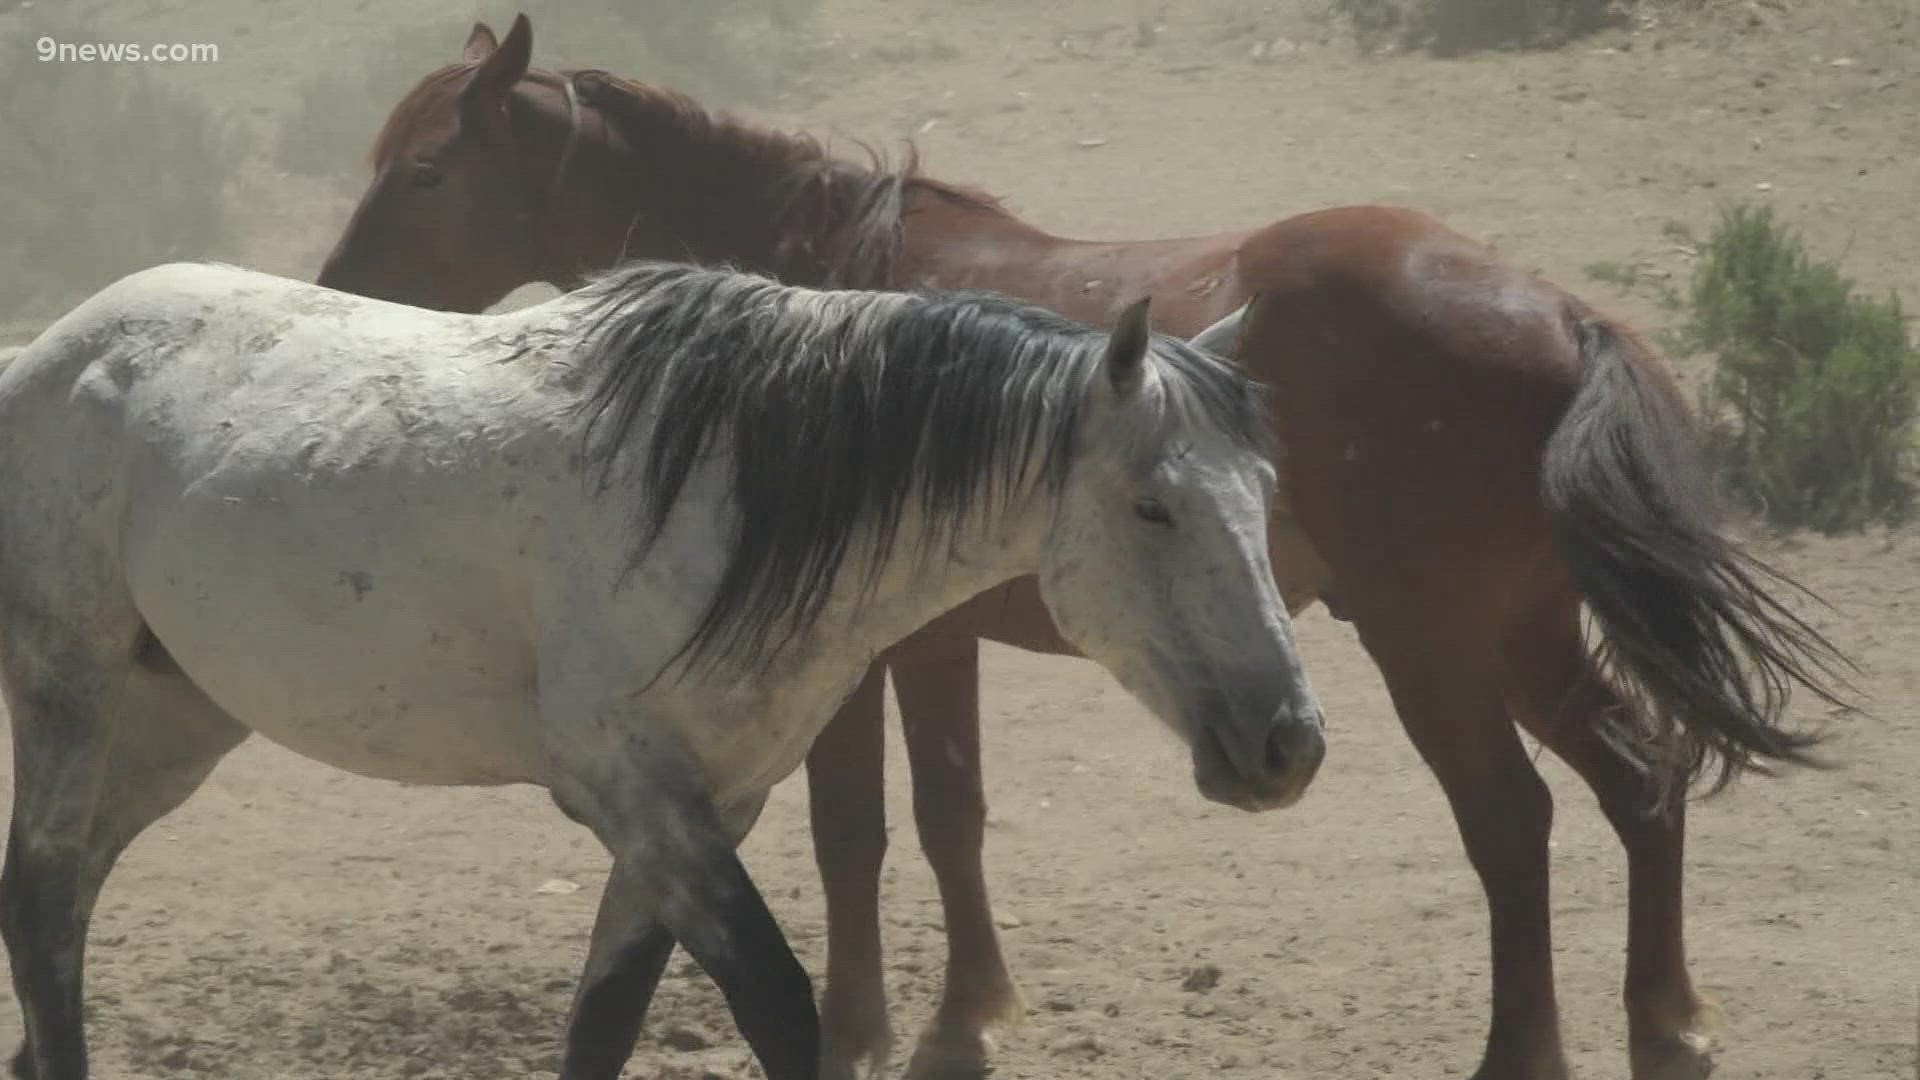 BLM plans to use a helicopter to drive wild horses into traps in the Sand Wash Basin because of food, water shortages – Gov. Polis asked them to hold off.